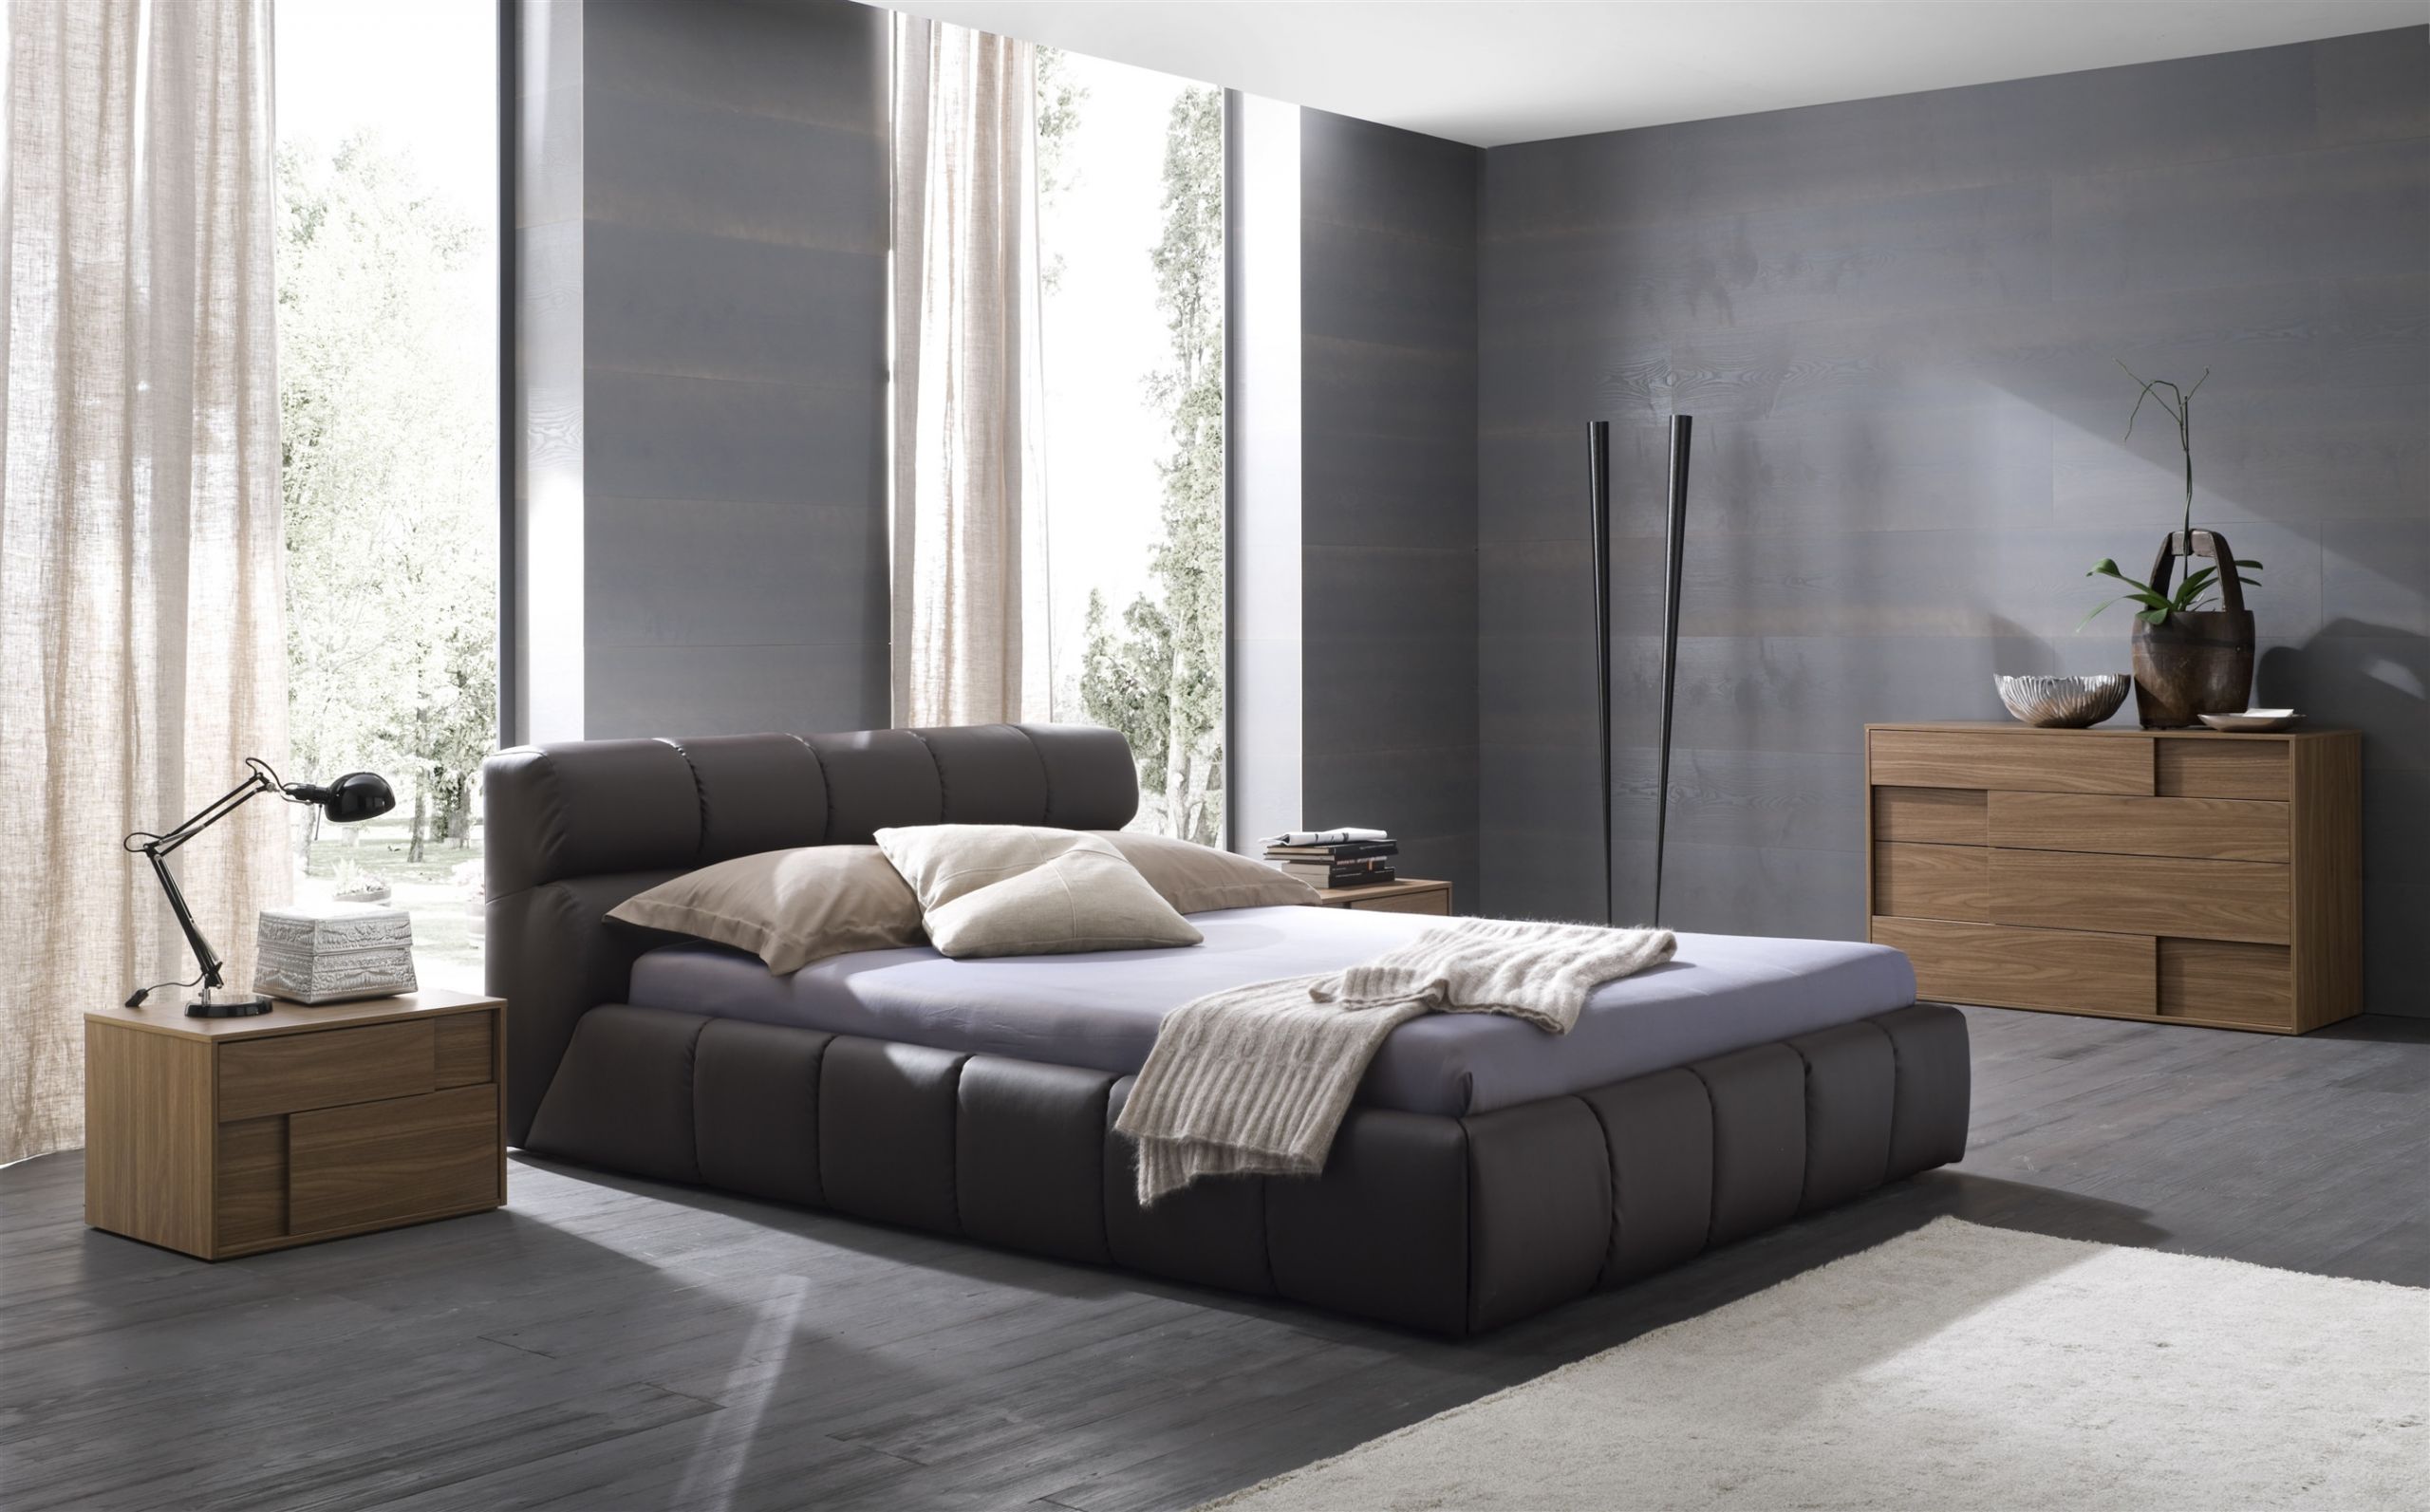 Mens Bedroom Furniture
 40 Modern Bedroom For Your Home – The WoW Style